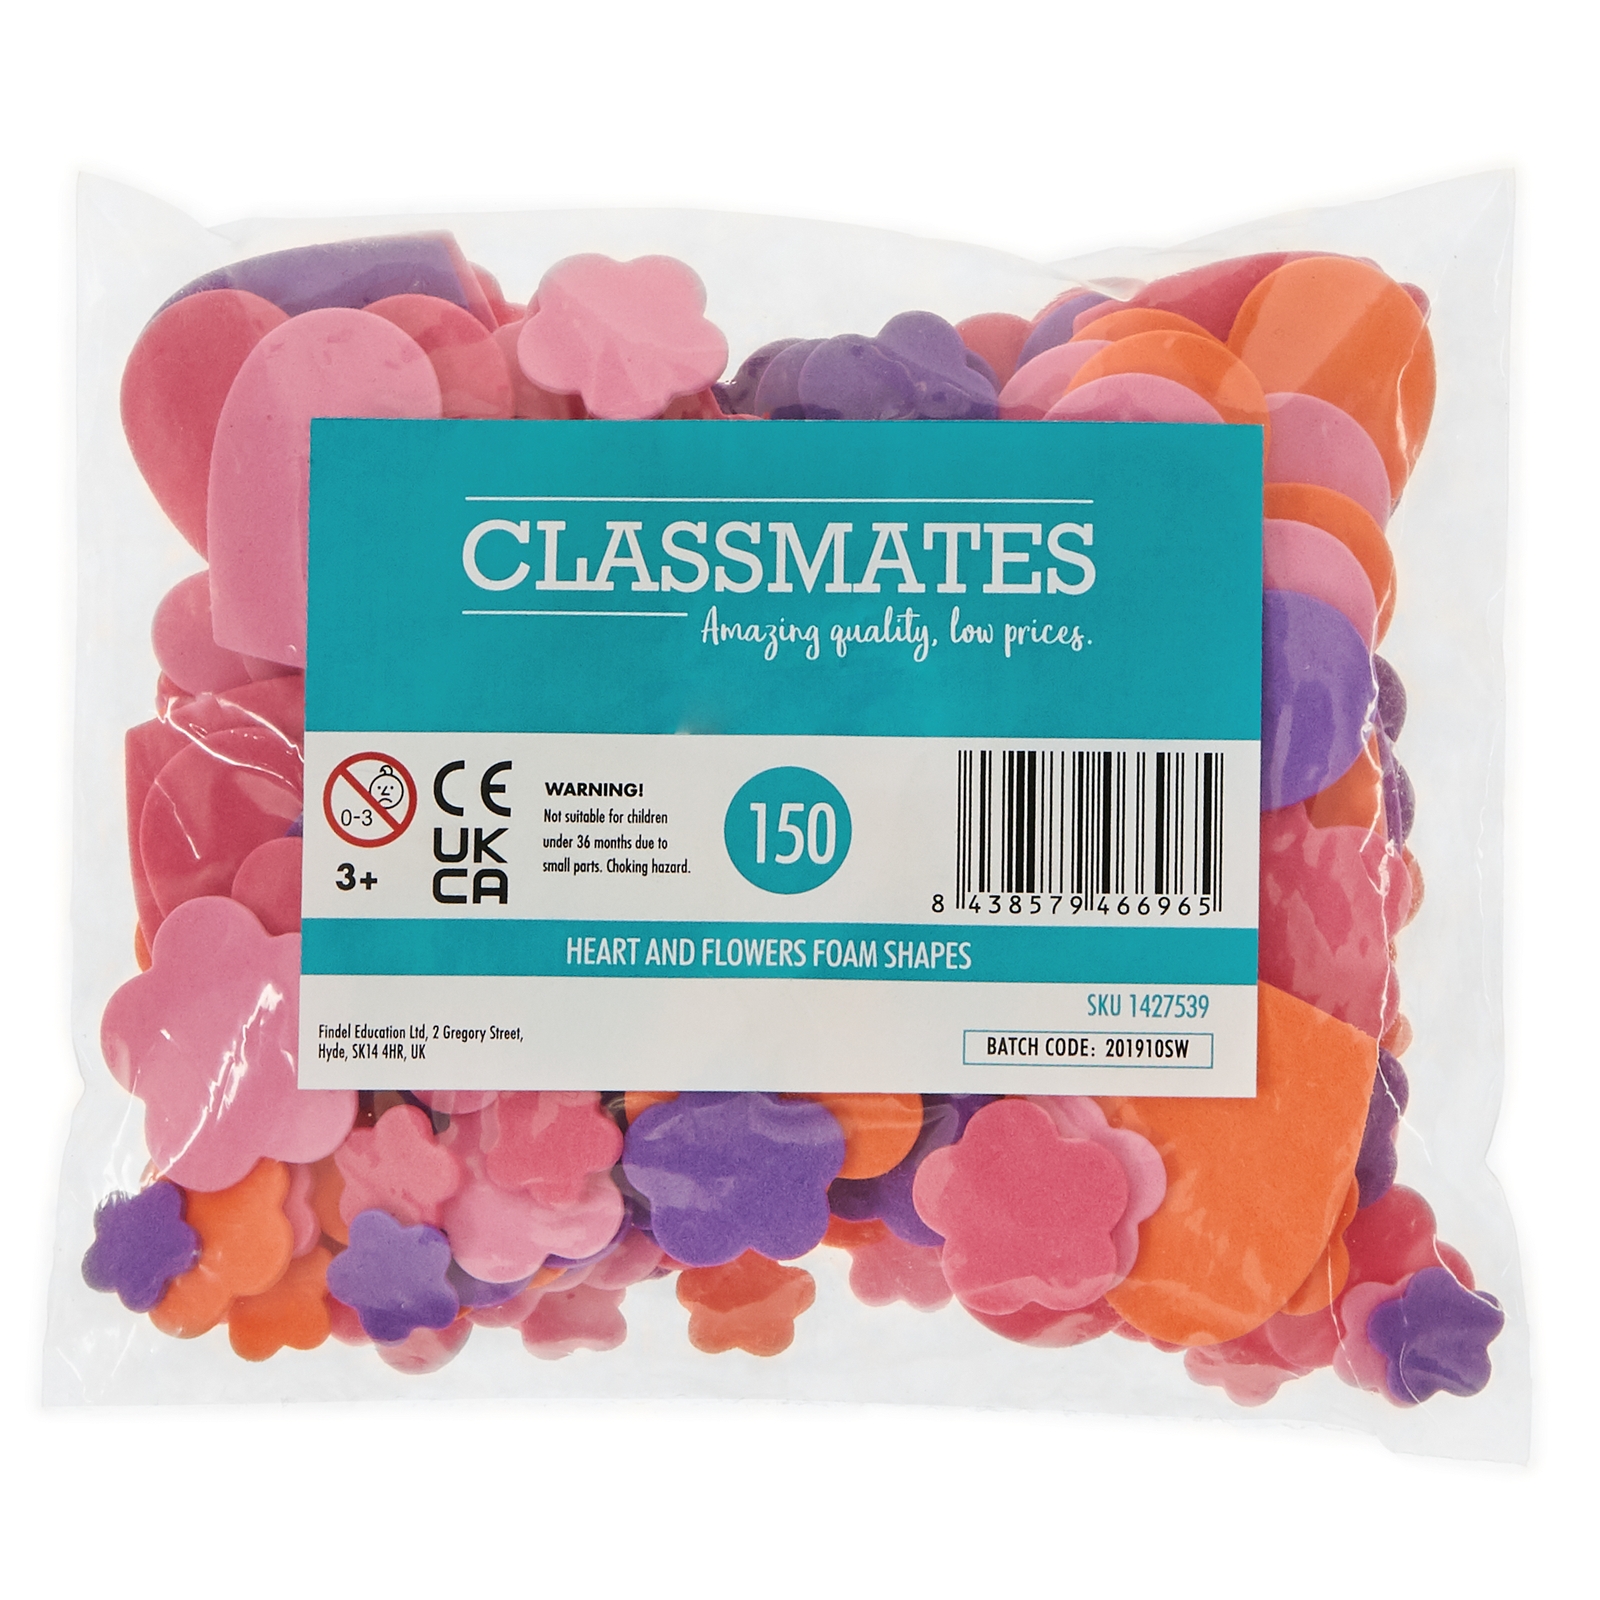 Heart and Flowers Foam Shapes Pack of 150